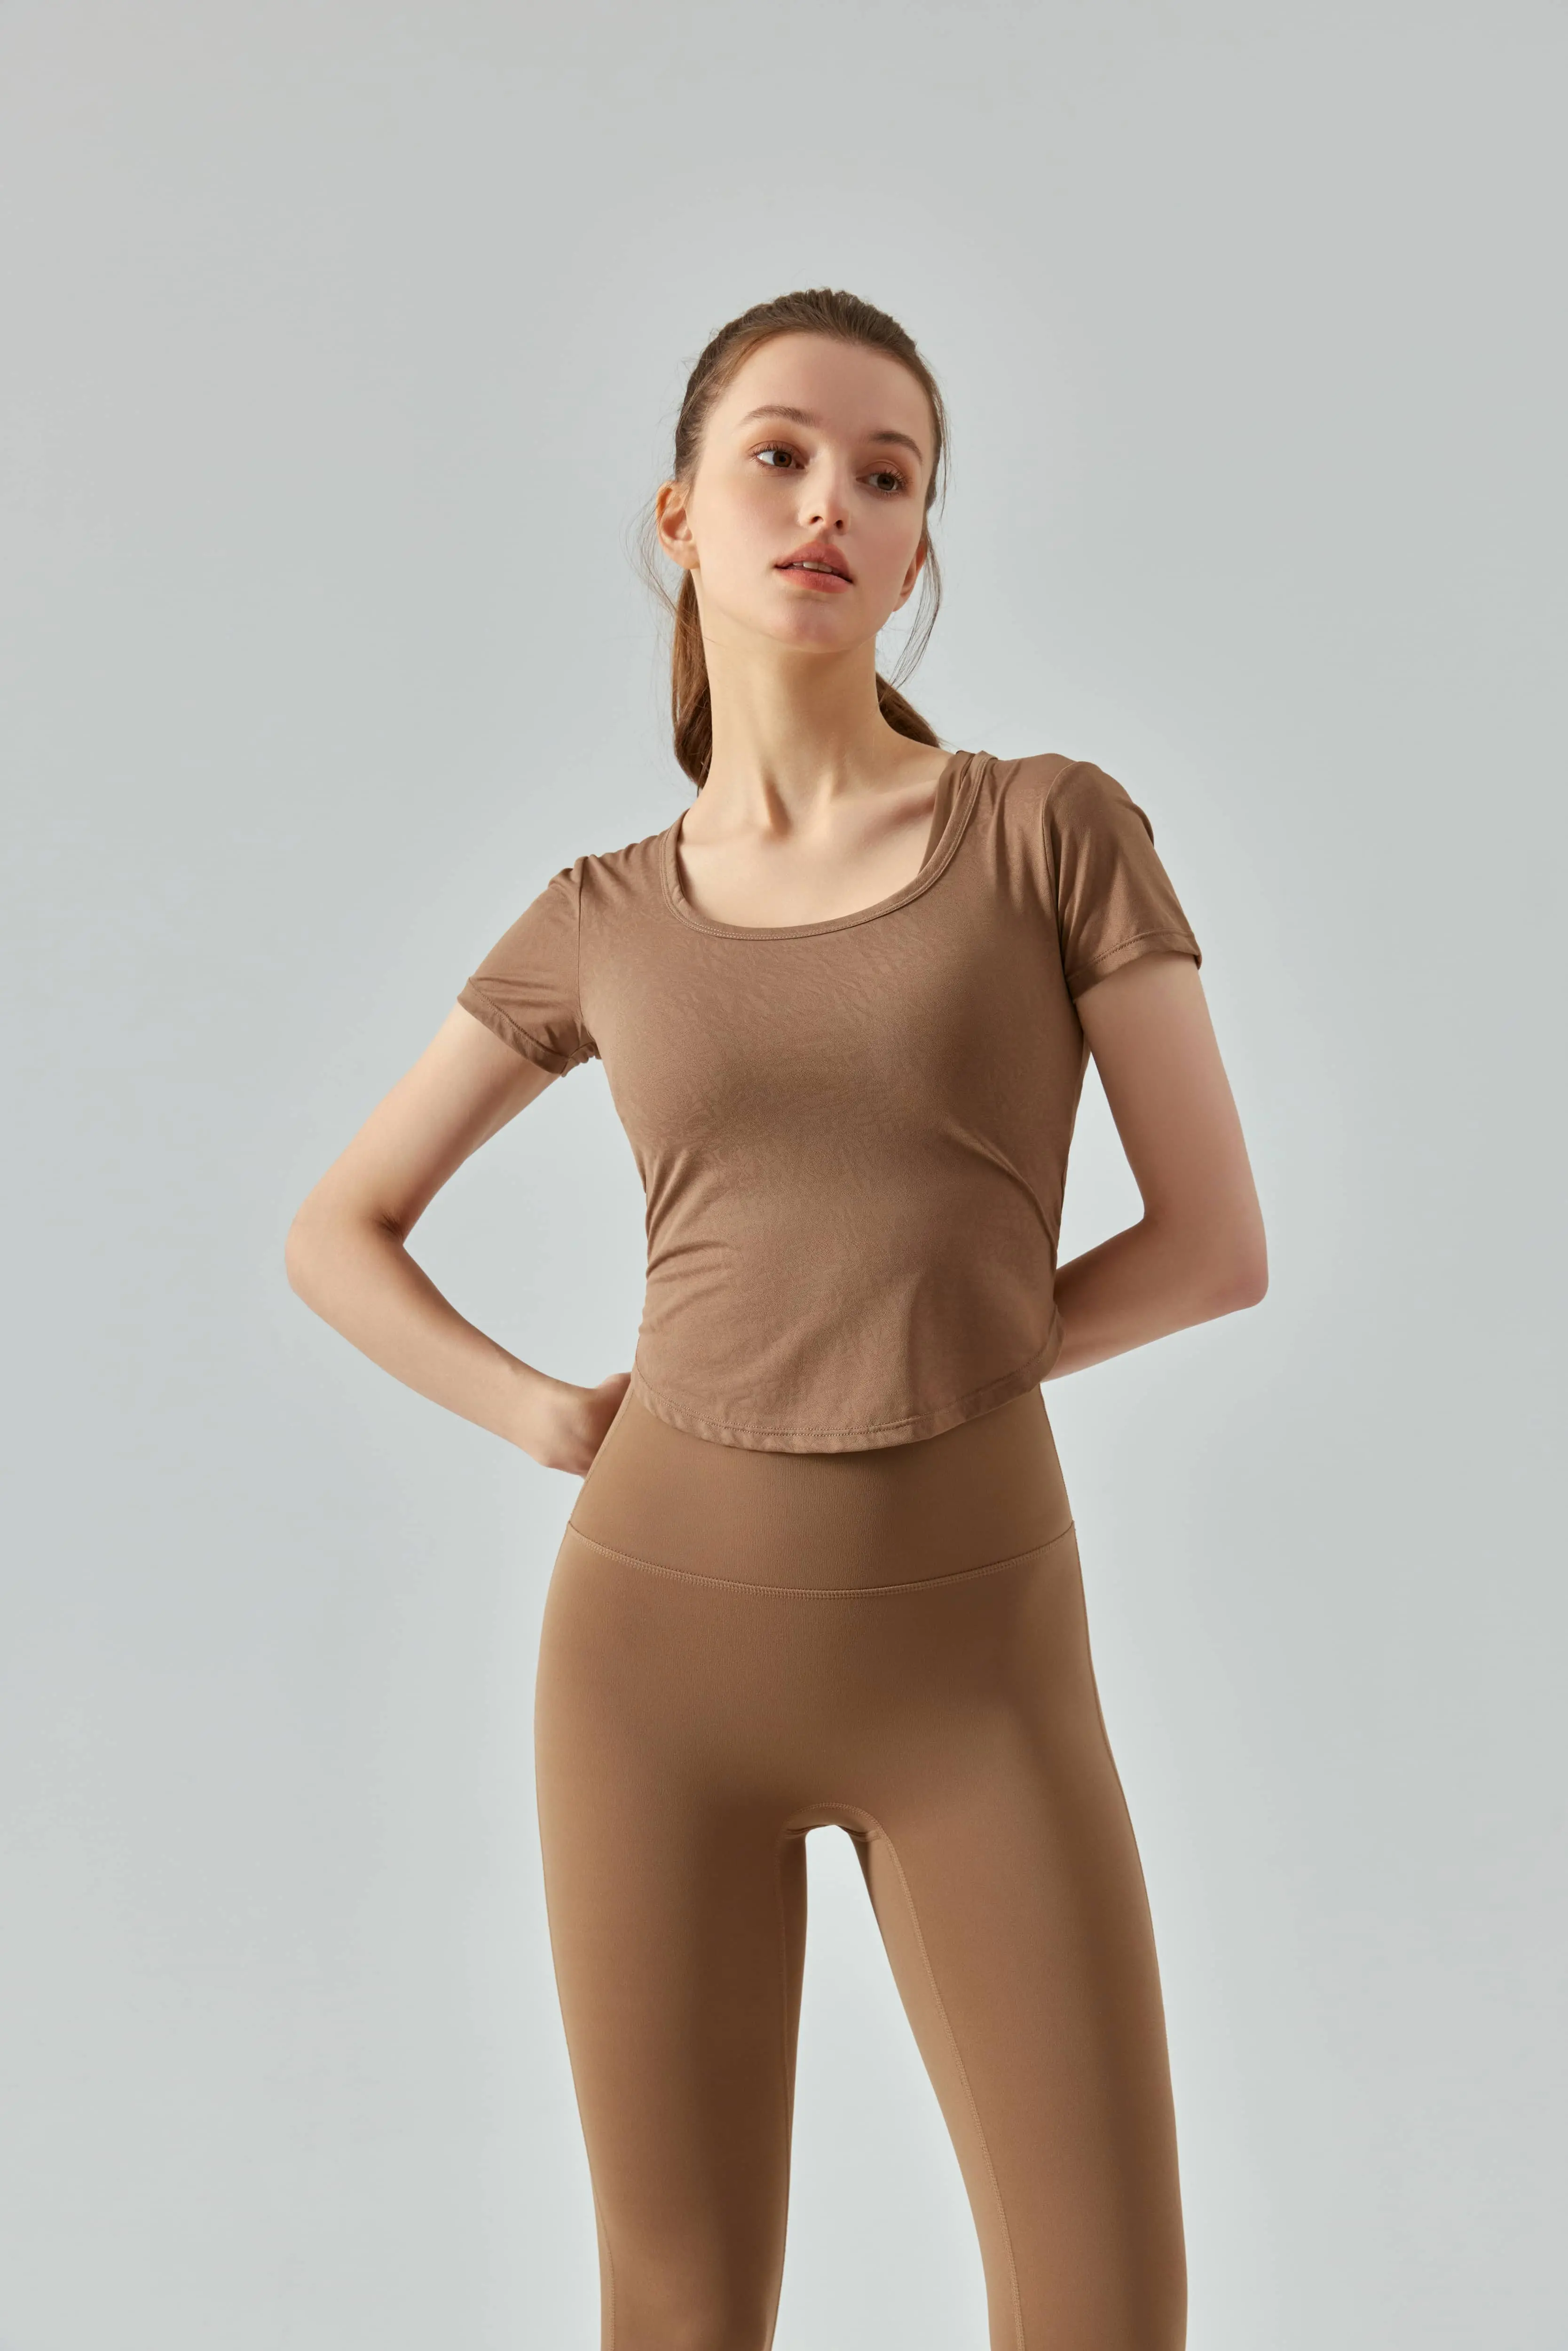  Brown Tank Top for Women Athletic Quick Dry Yoga